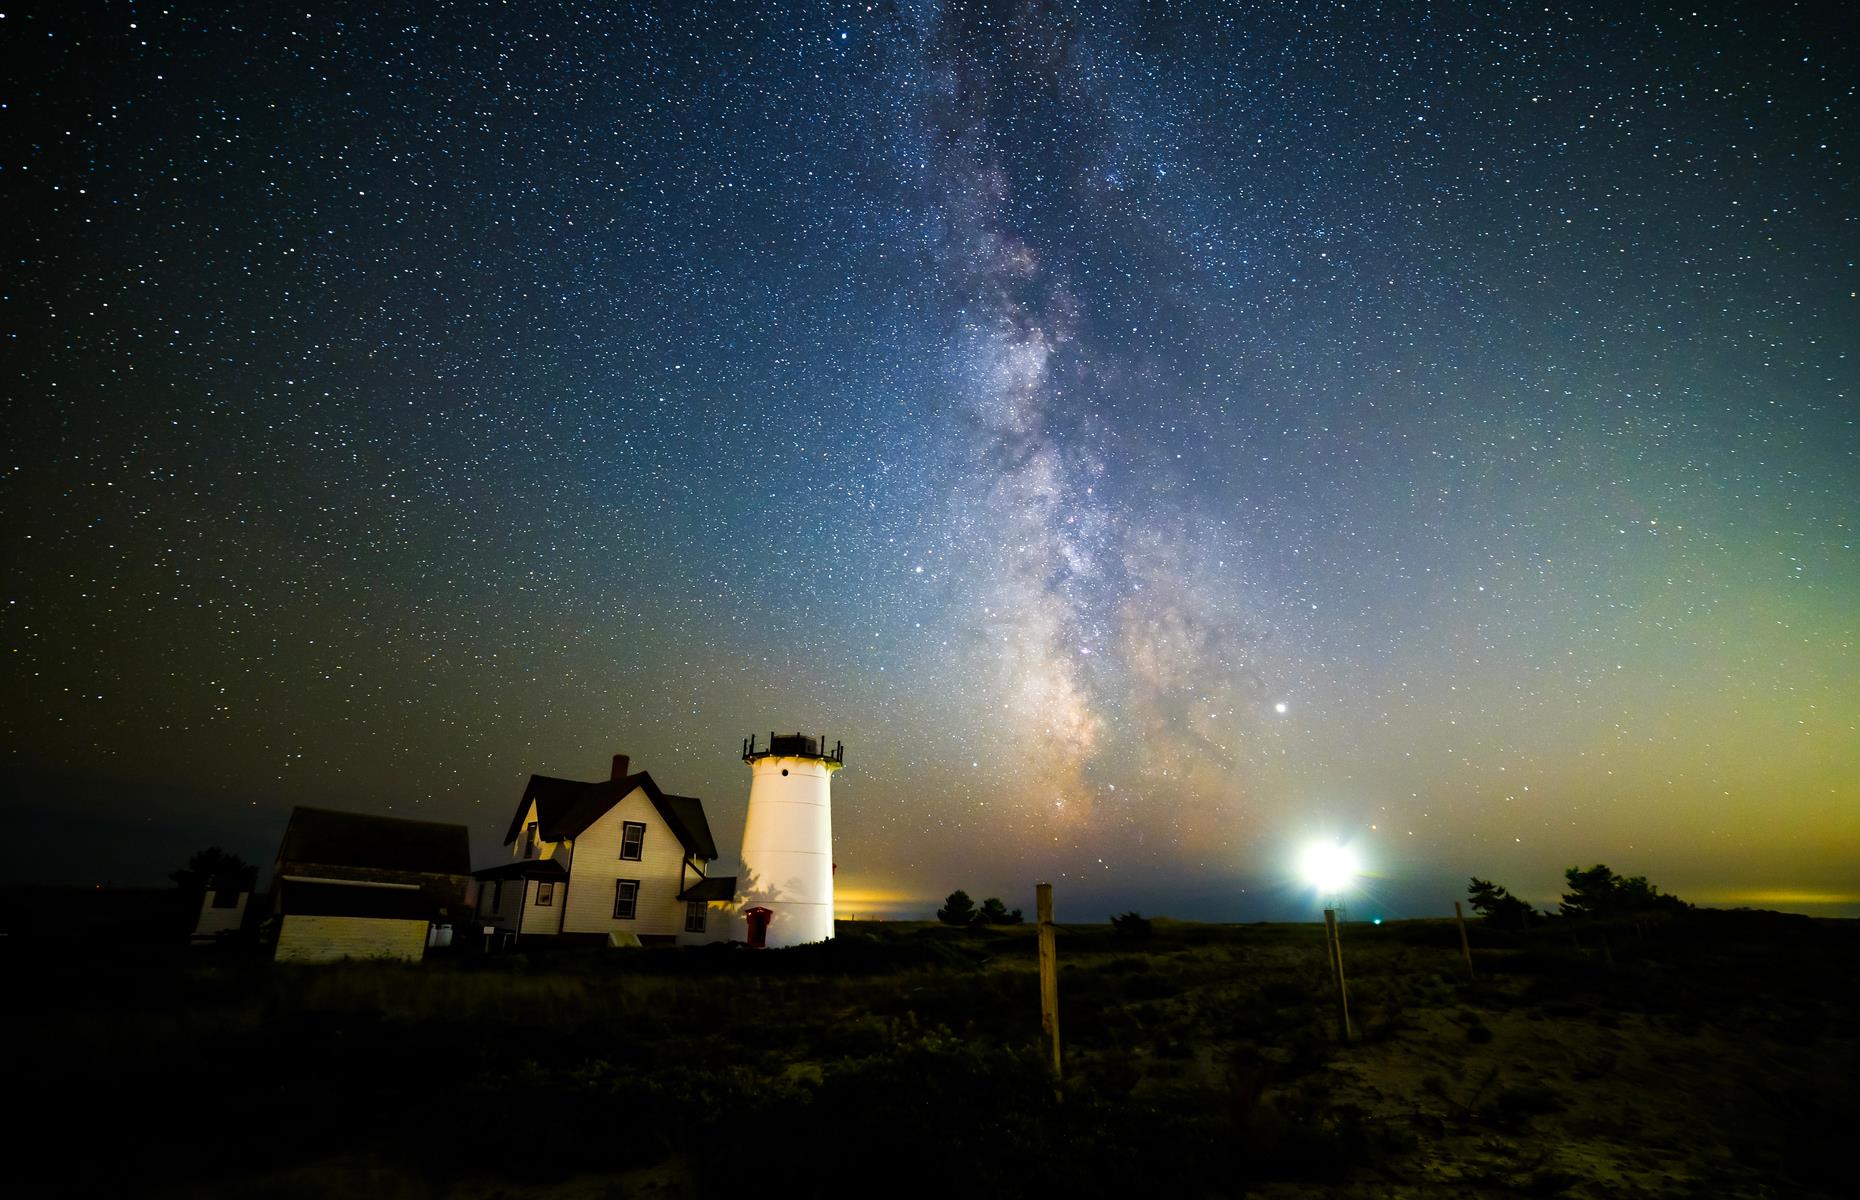 <p>It was reported in 2016 that 80% of Americans <a href="https://www.vox.com/2016/6/10/11905390/light-pollution-night-sky">can no longer see the Milky Way</a> where they reside. And while a remote location is your best bet for obscure sights (the Omega Nebula, the Andromeda Galaxy), you don’t have to travel far from civilization for our miraculous galaxy to reveal itself. At least not in Massachusetts, where the water-surrounded Cape Cod peninsula dazzles many a night. The <a href="http://www.capecodastronomy.org/">Cape Cod Astronomical Society</a> usually holds regular star parties, but <a href="http://www.capecodastronomy.org/meetings-events/calendar/">check the calendar</a> for this year's schedule. </p>